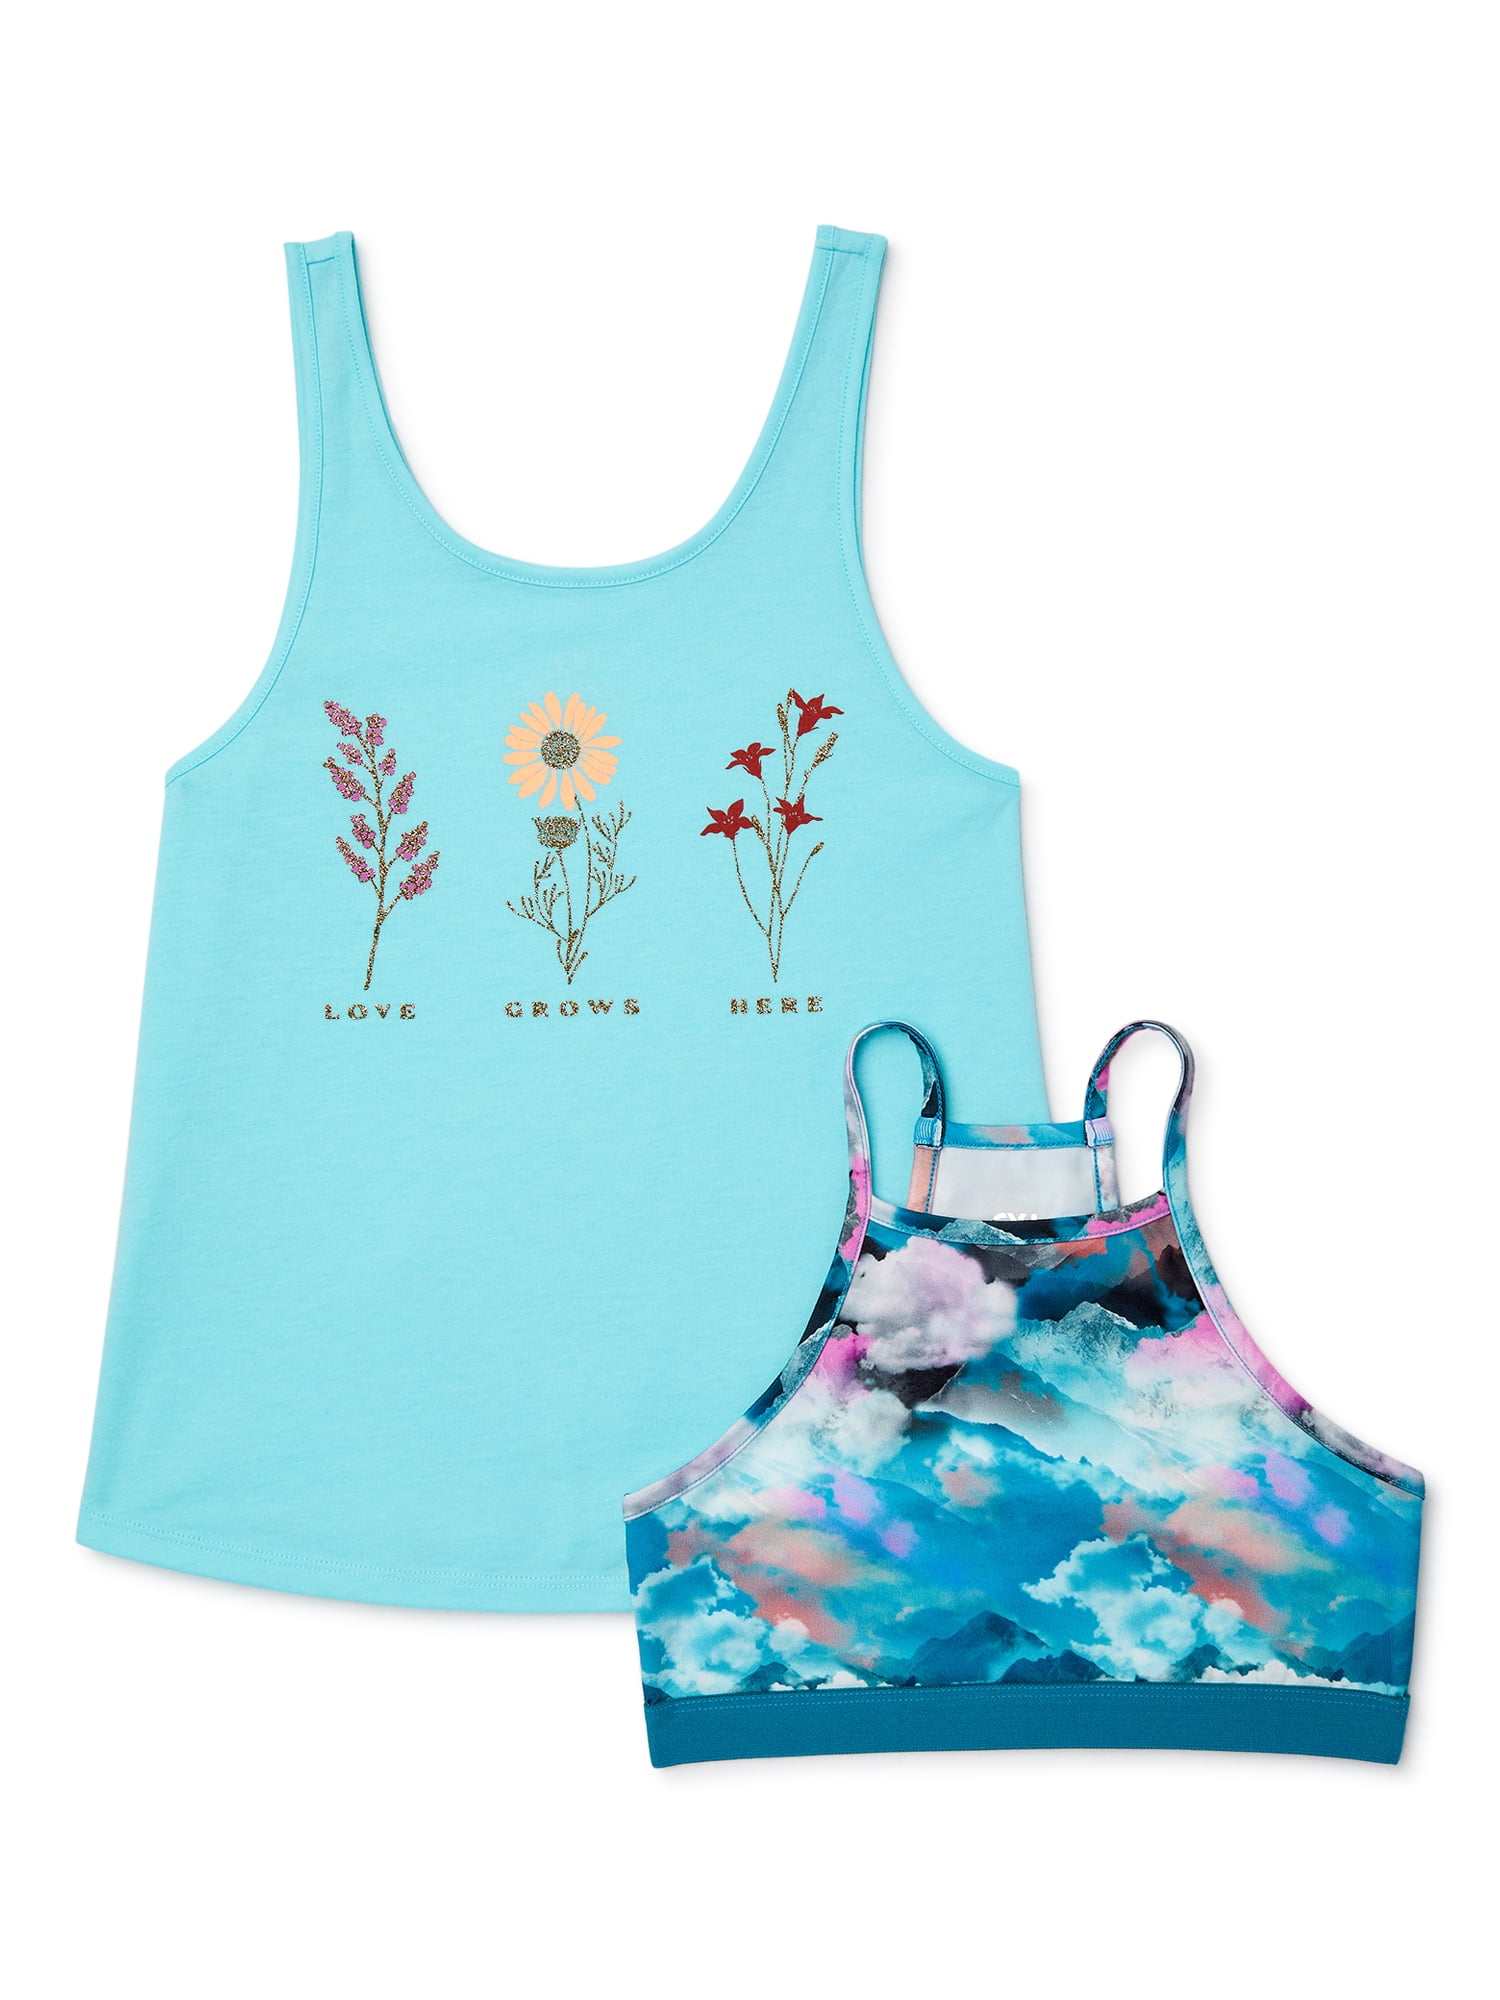 Justice Girls Graphic Tank